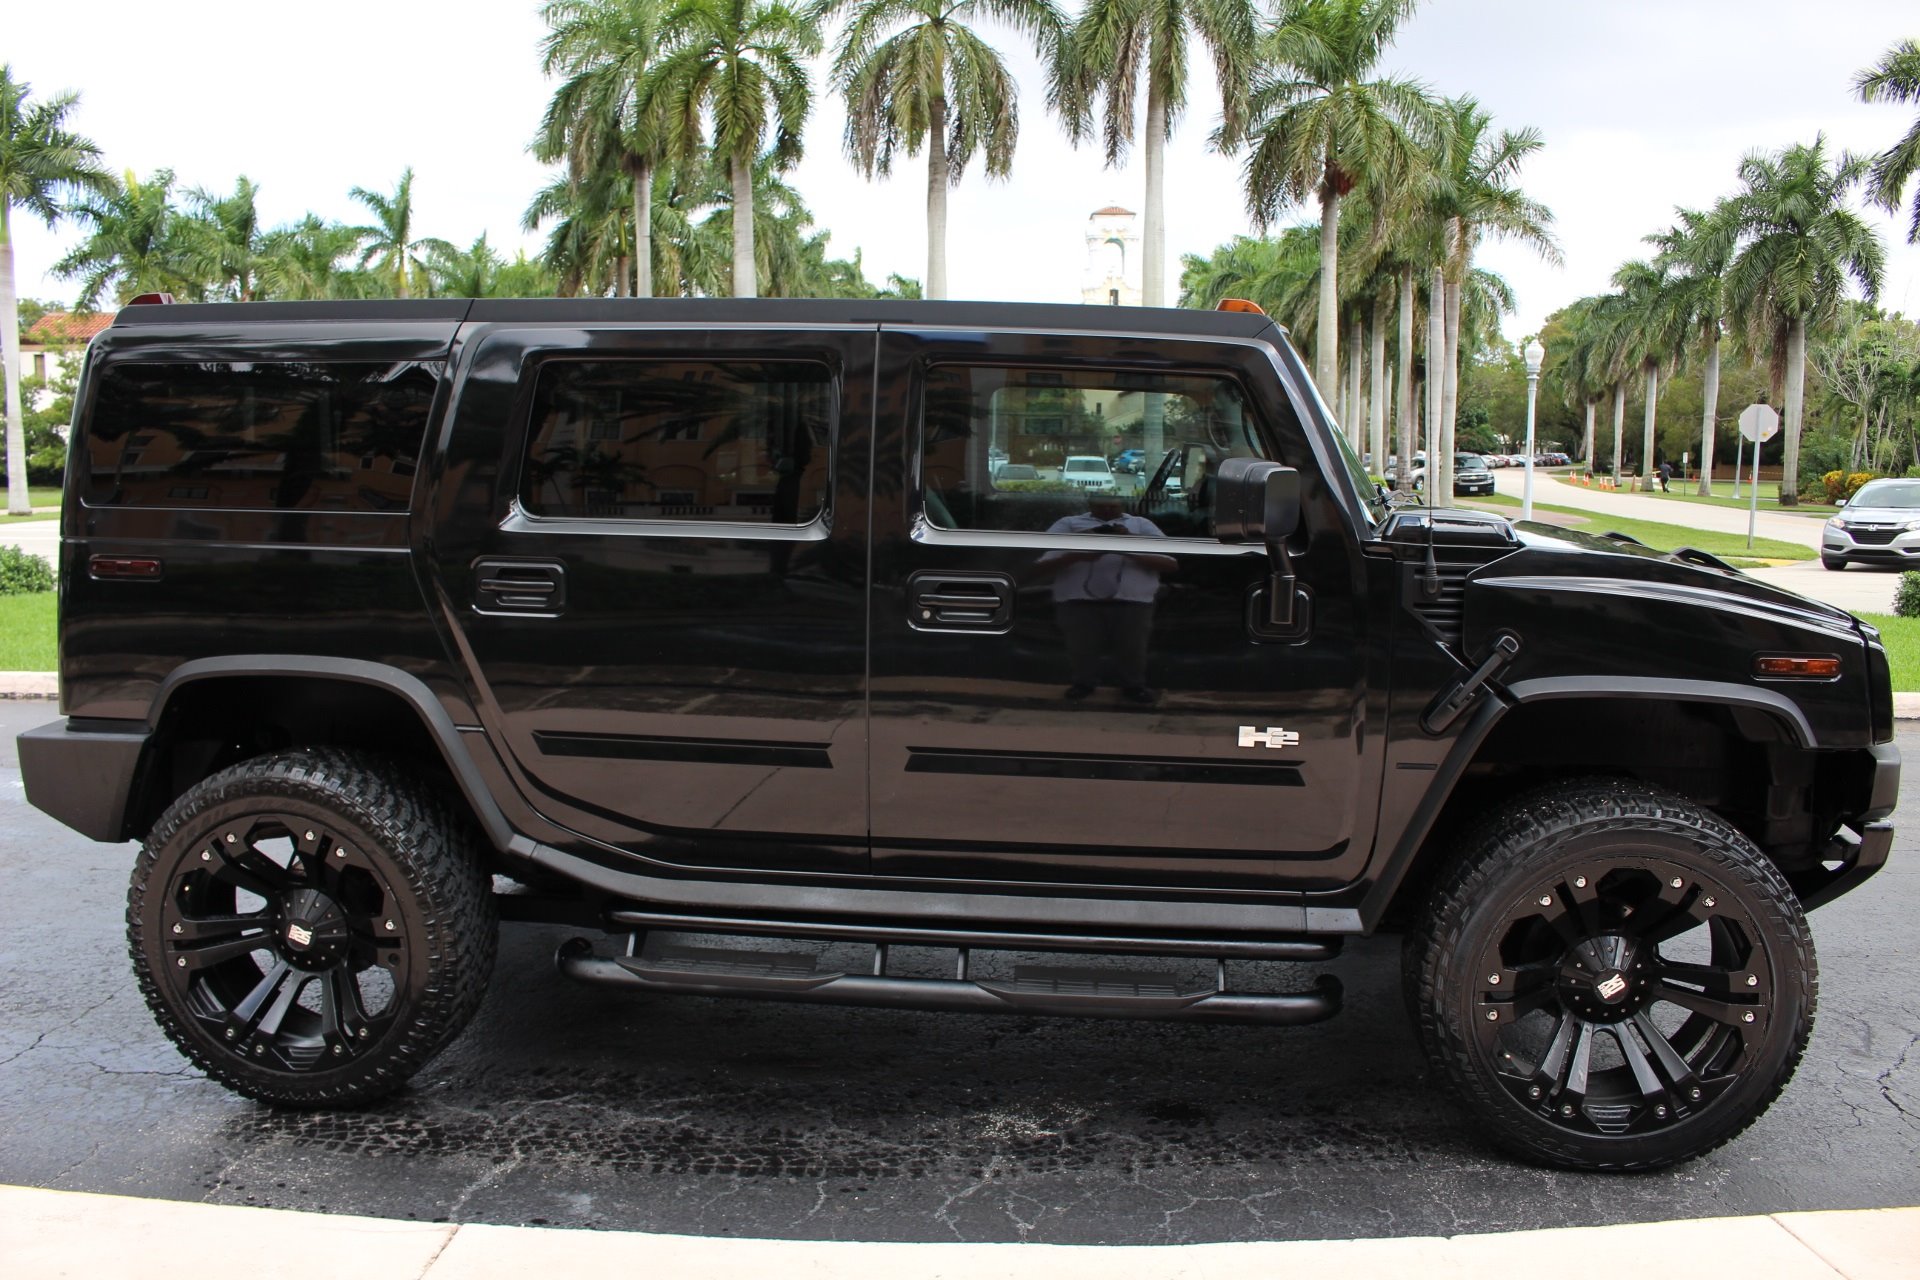 Used 2004 HUMMER H2 Lux Series for sale Sold at The Gables Sports Cars in Miami FL 33146 3